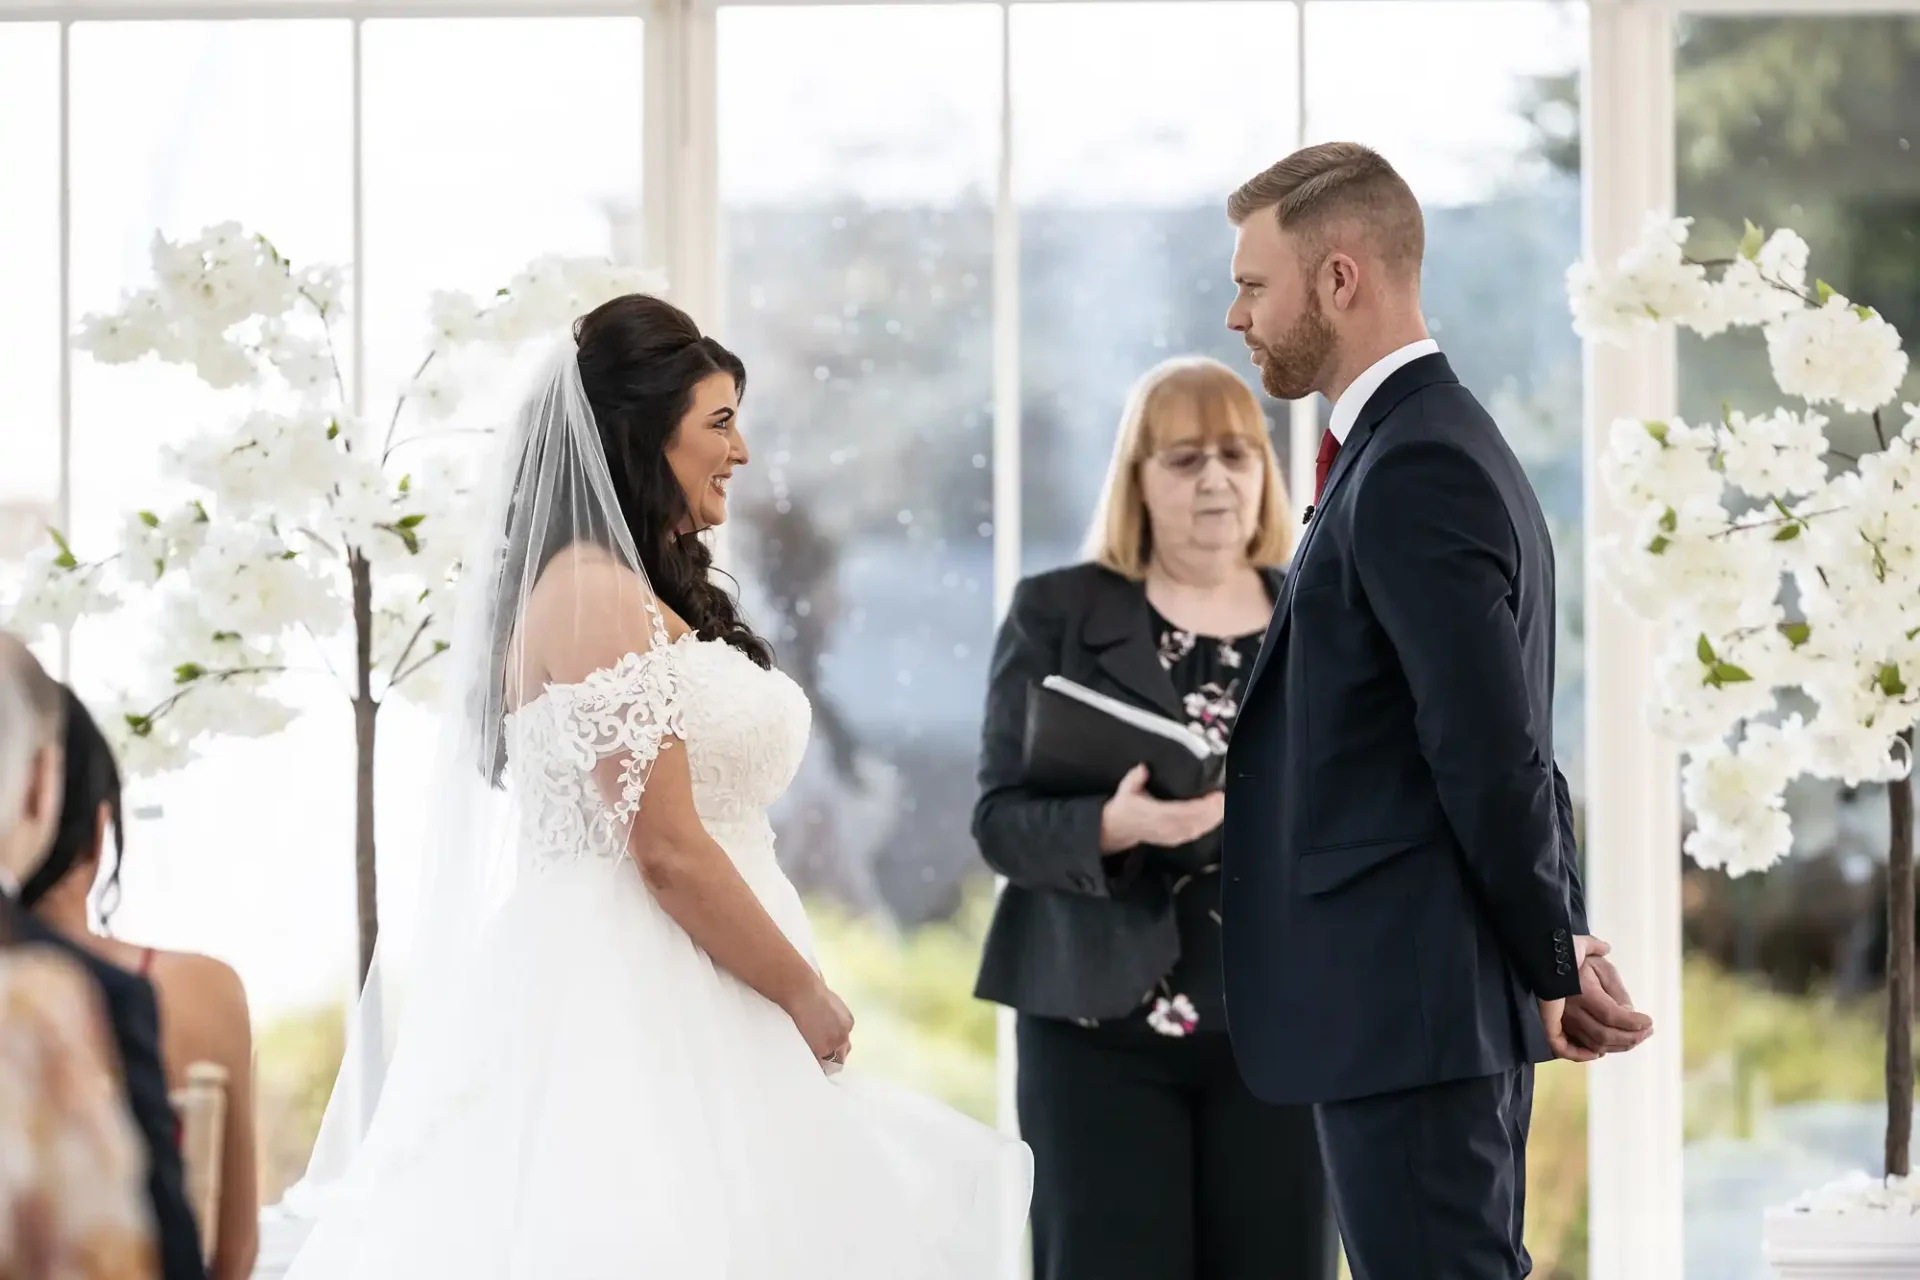 A bride and groom exchange vows in a sunlit room with white floral decorations, officiant and guests in attendance.